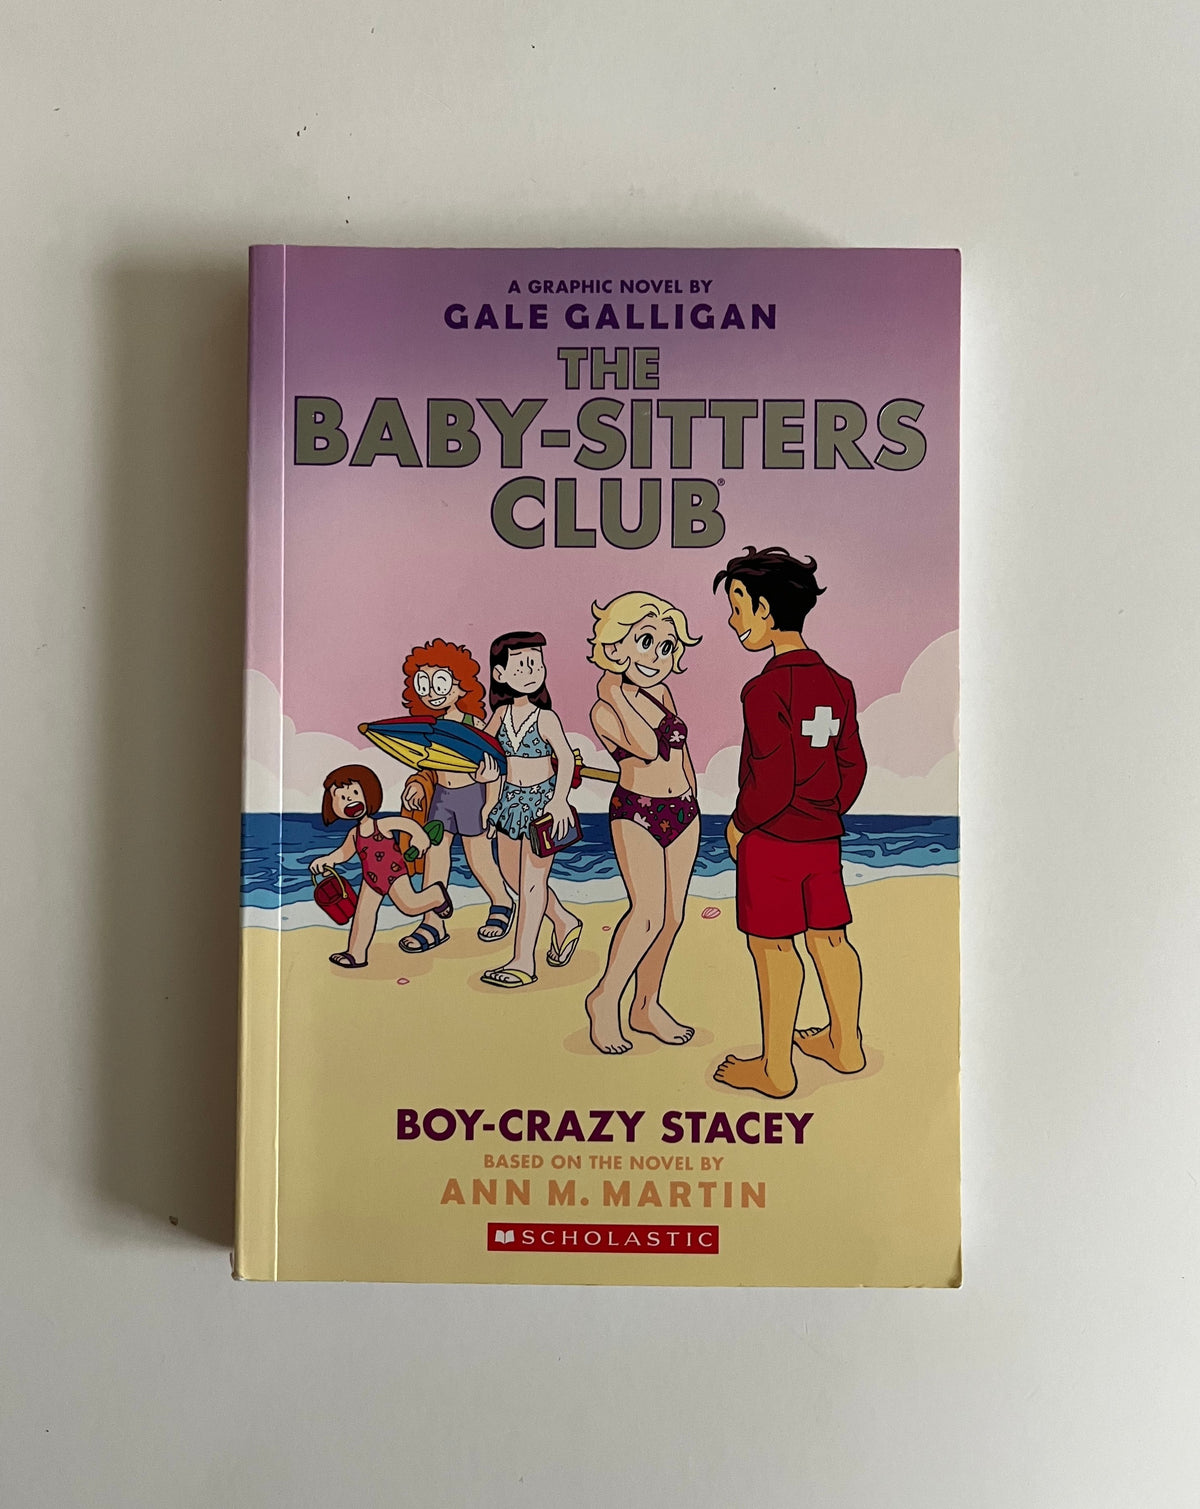 The Baby-Sitters Club: Boy-Crazy Stacey by Gale Galligan